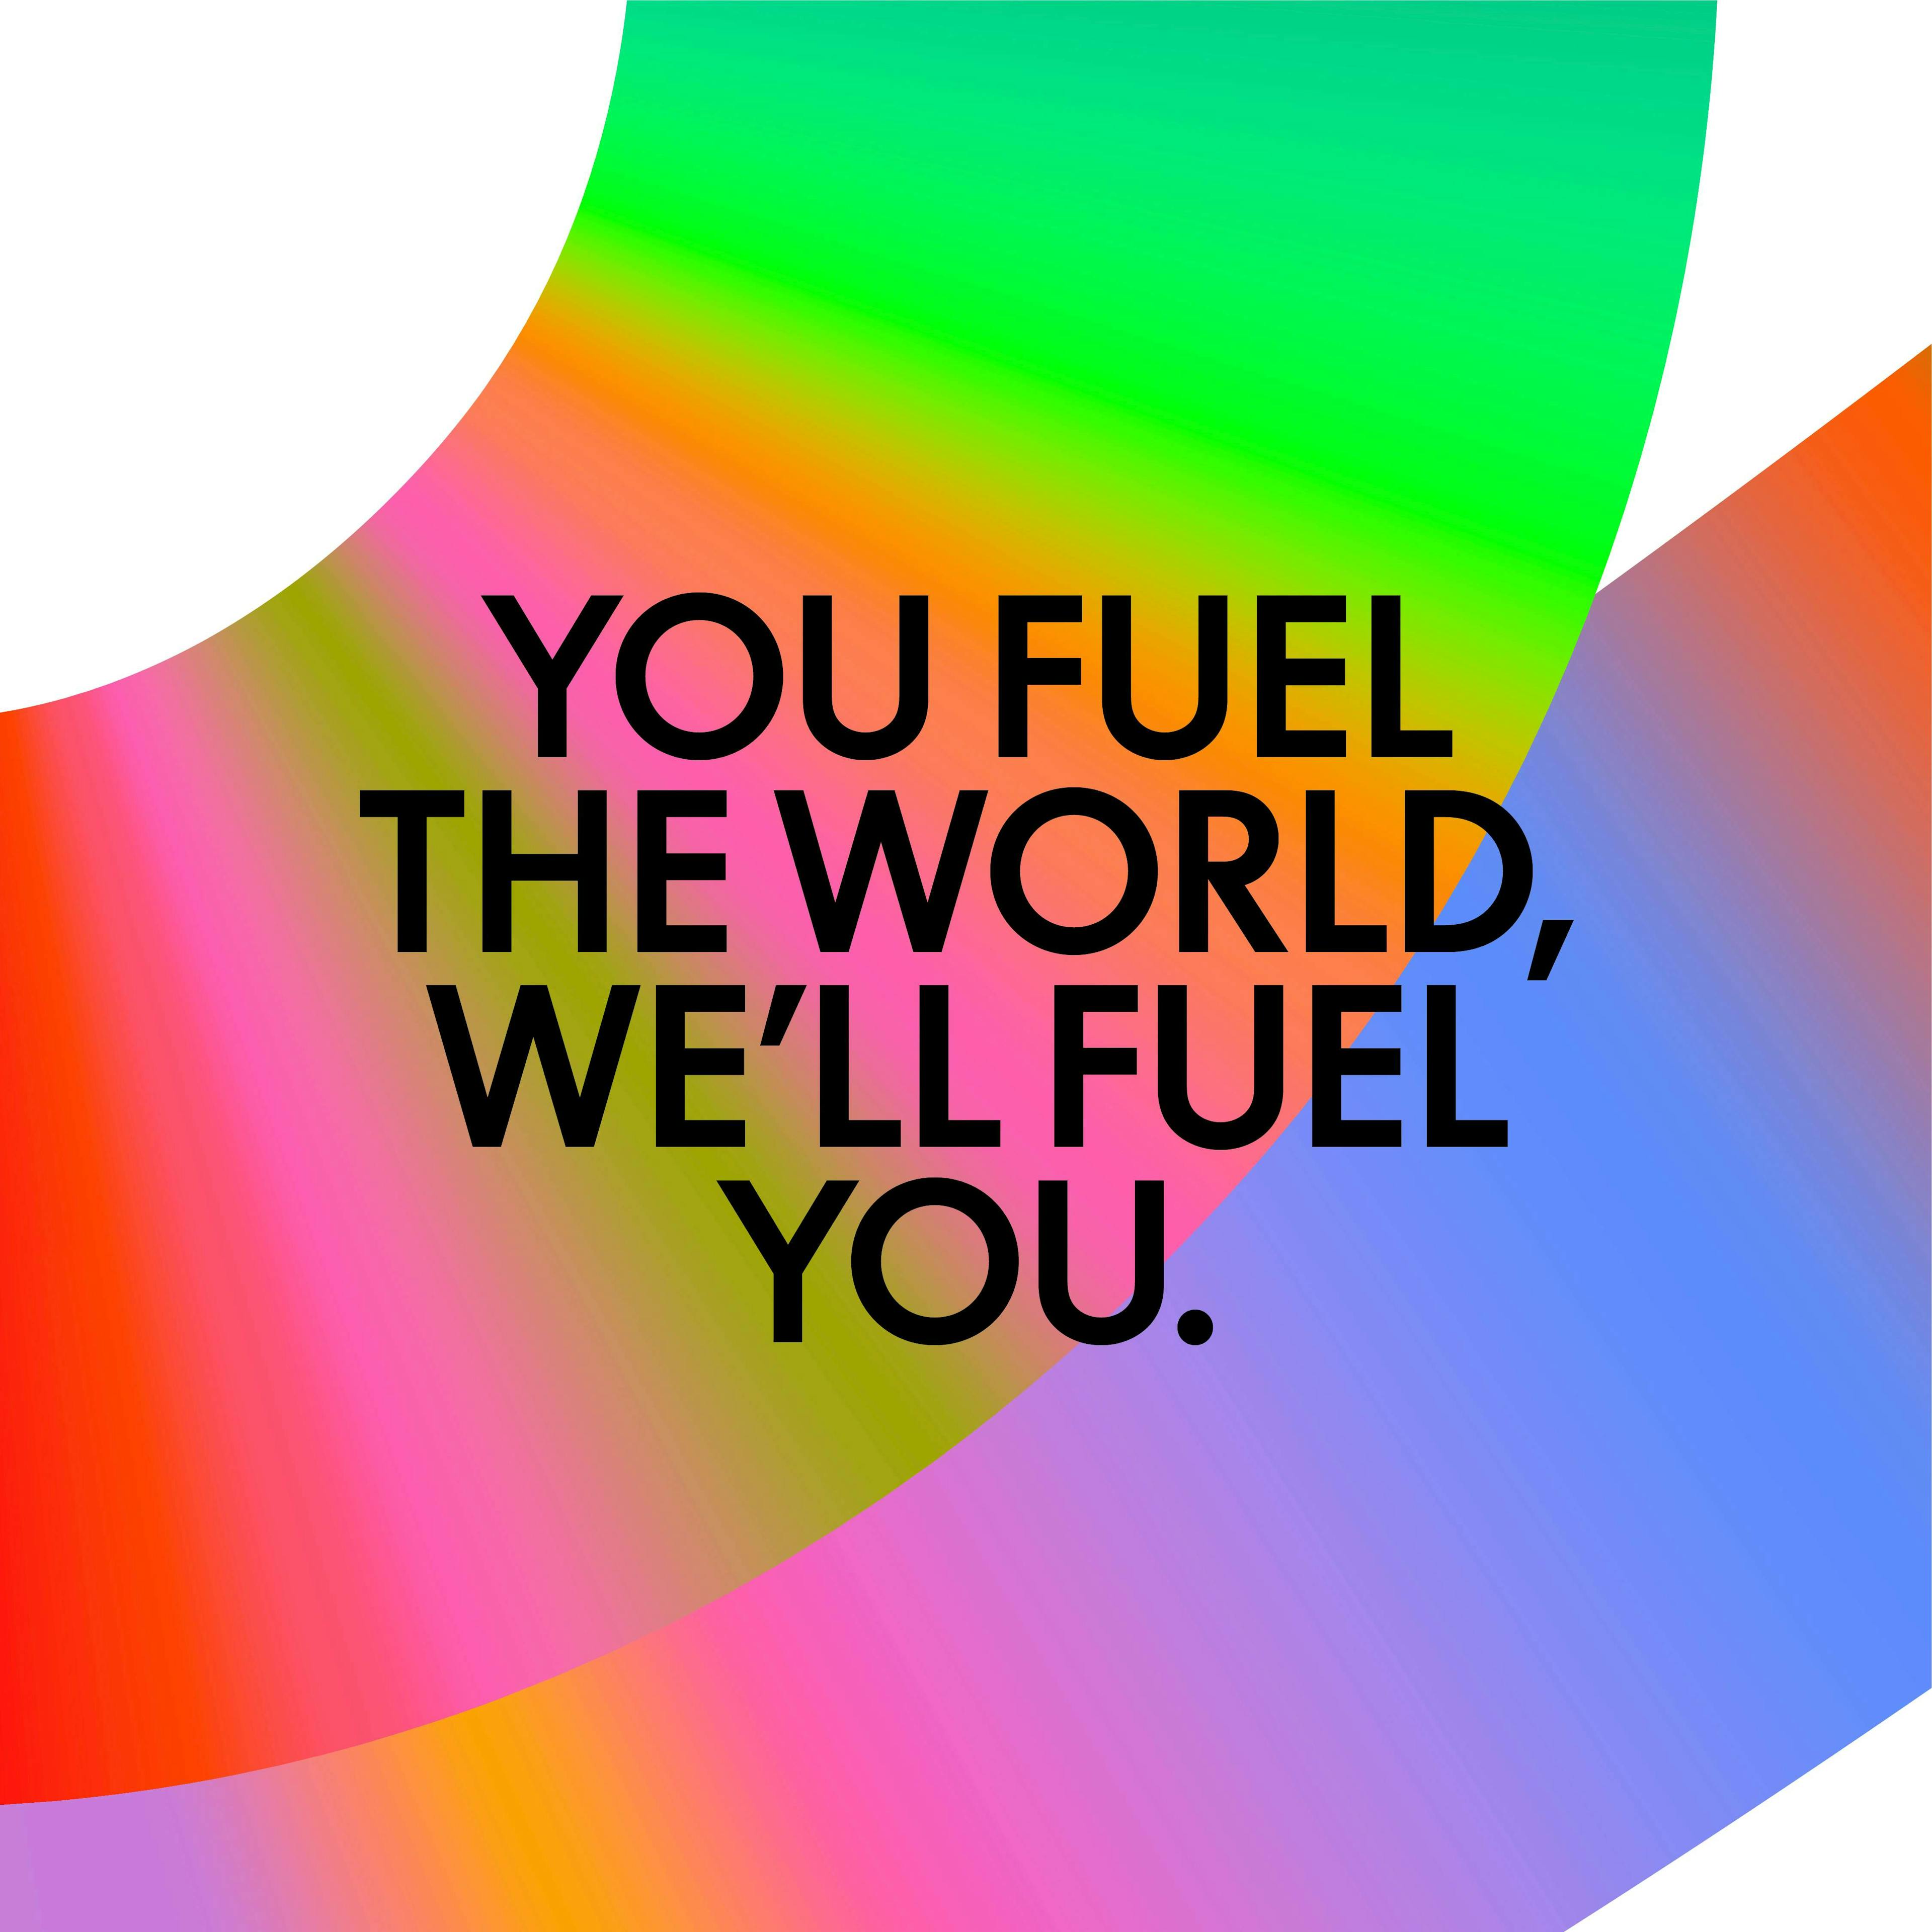 Graphic with text says "You fuel the world, we'll fuel you."